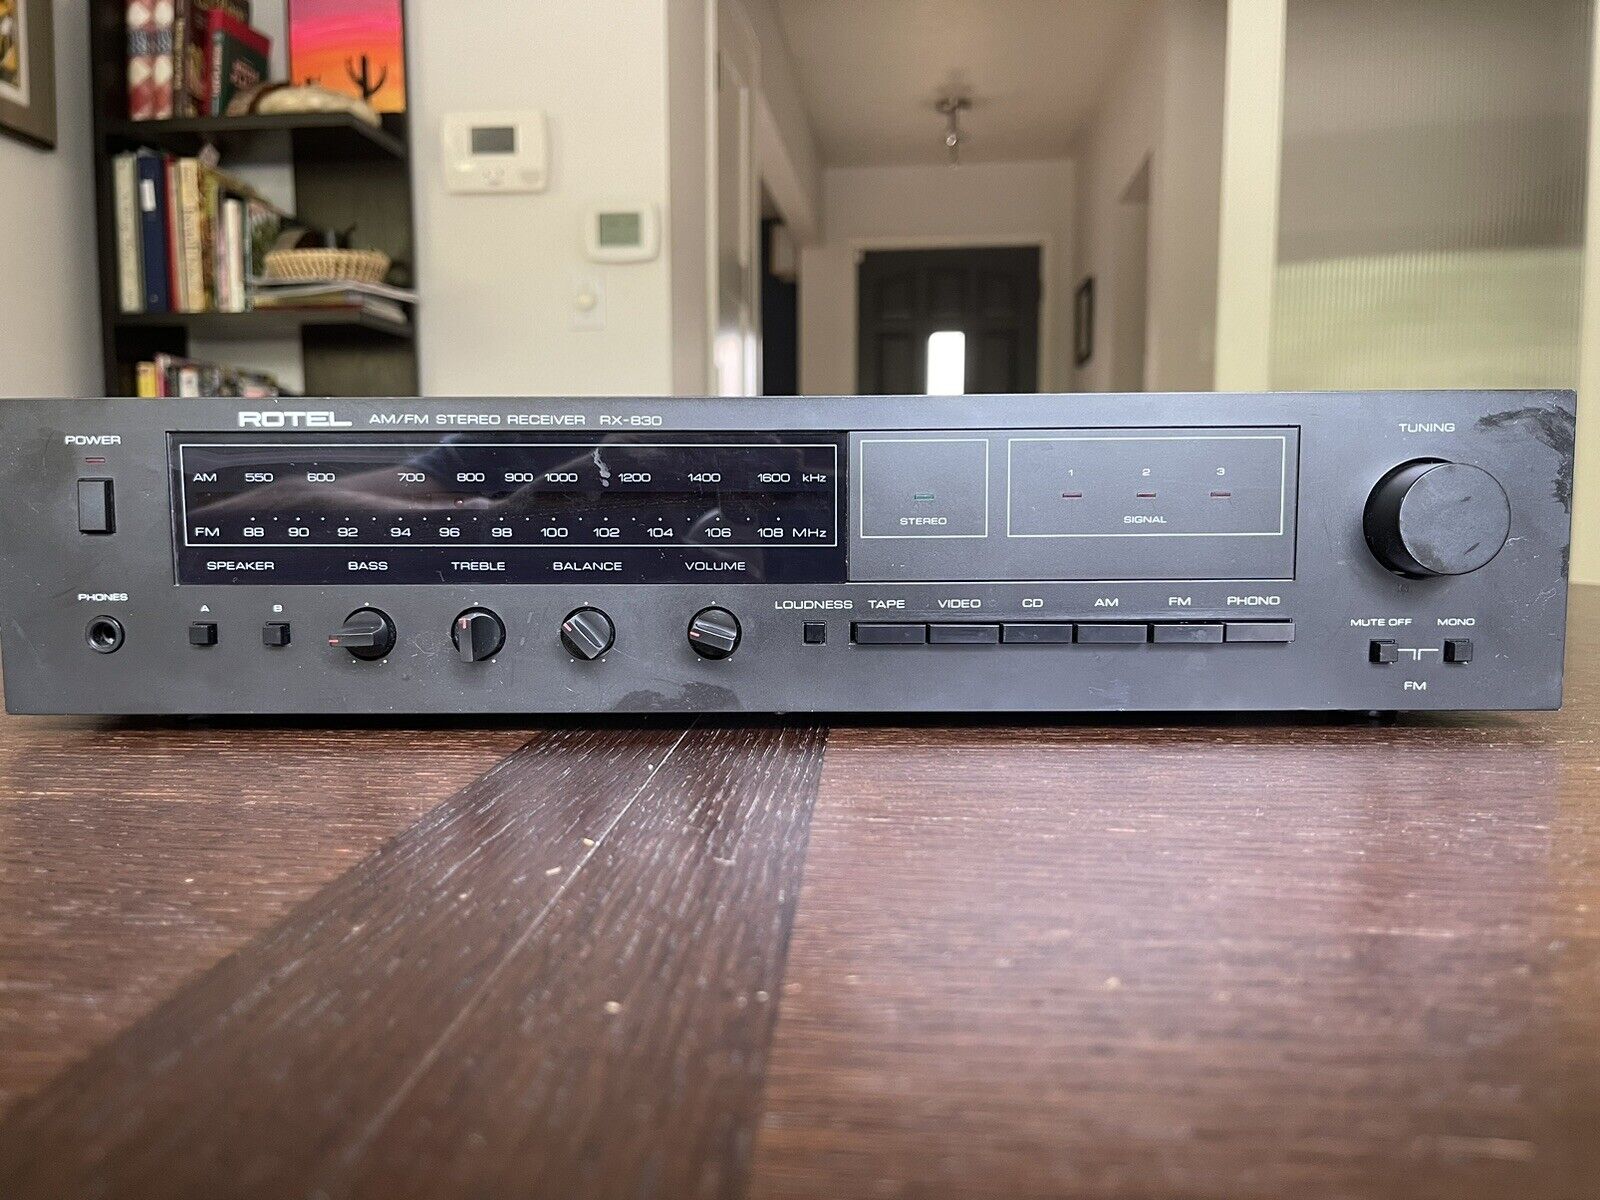 Vintage Rotel RX-830 AM/FM Stereo Receiver w/ Phono.  Works great